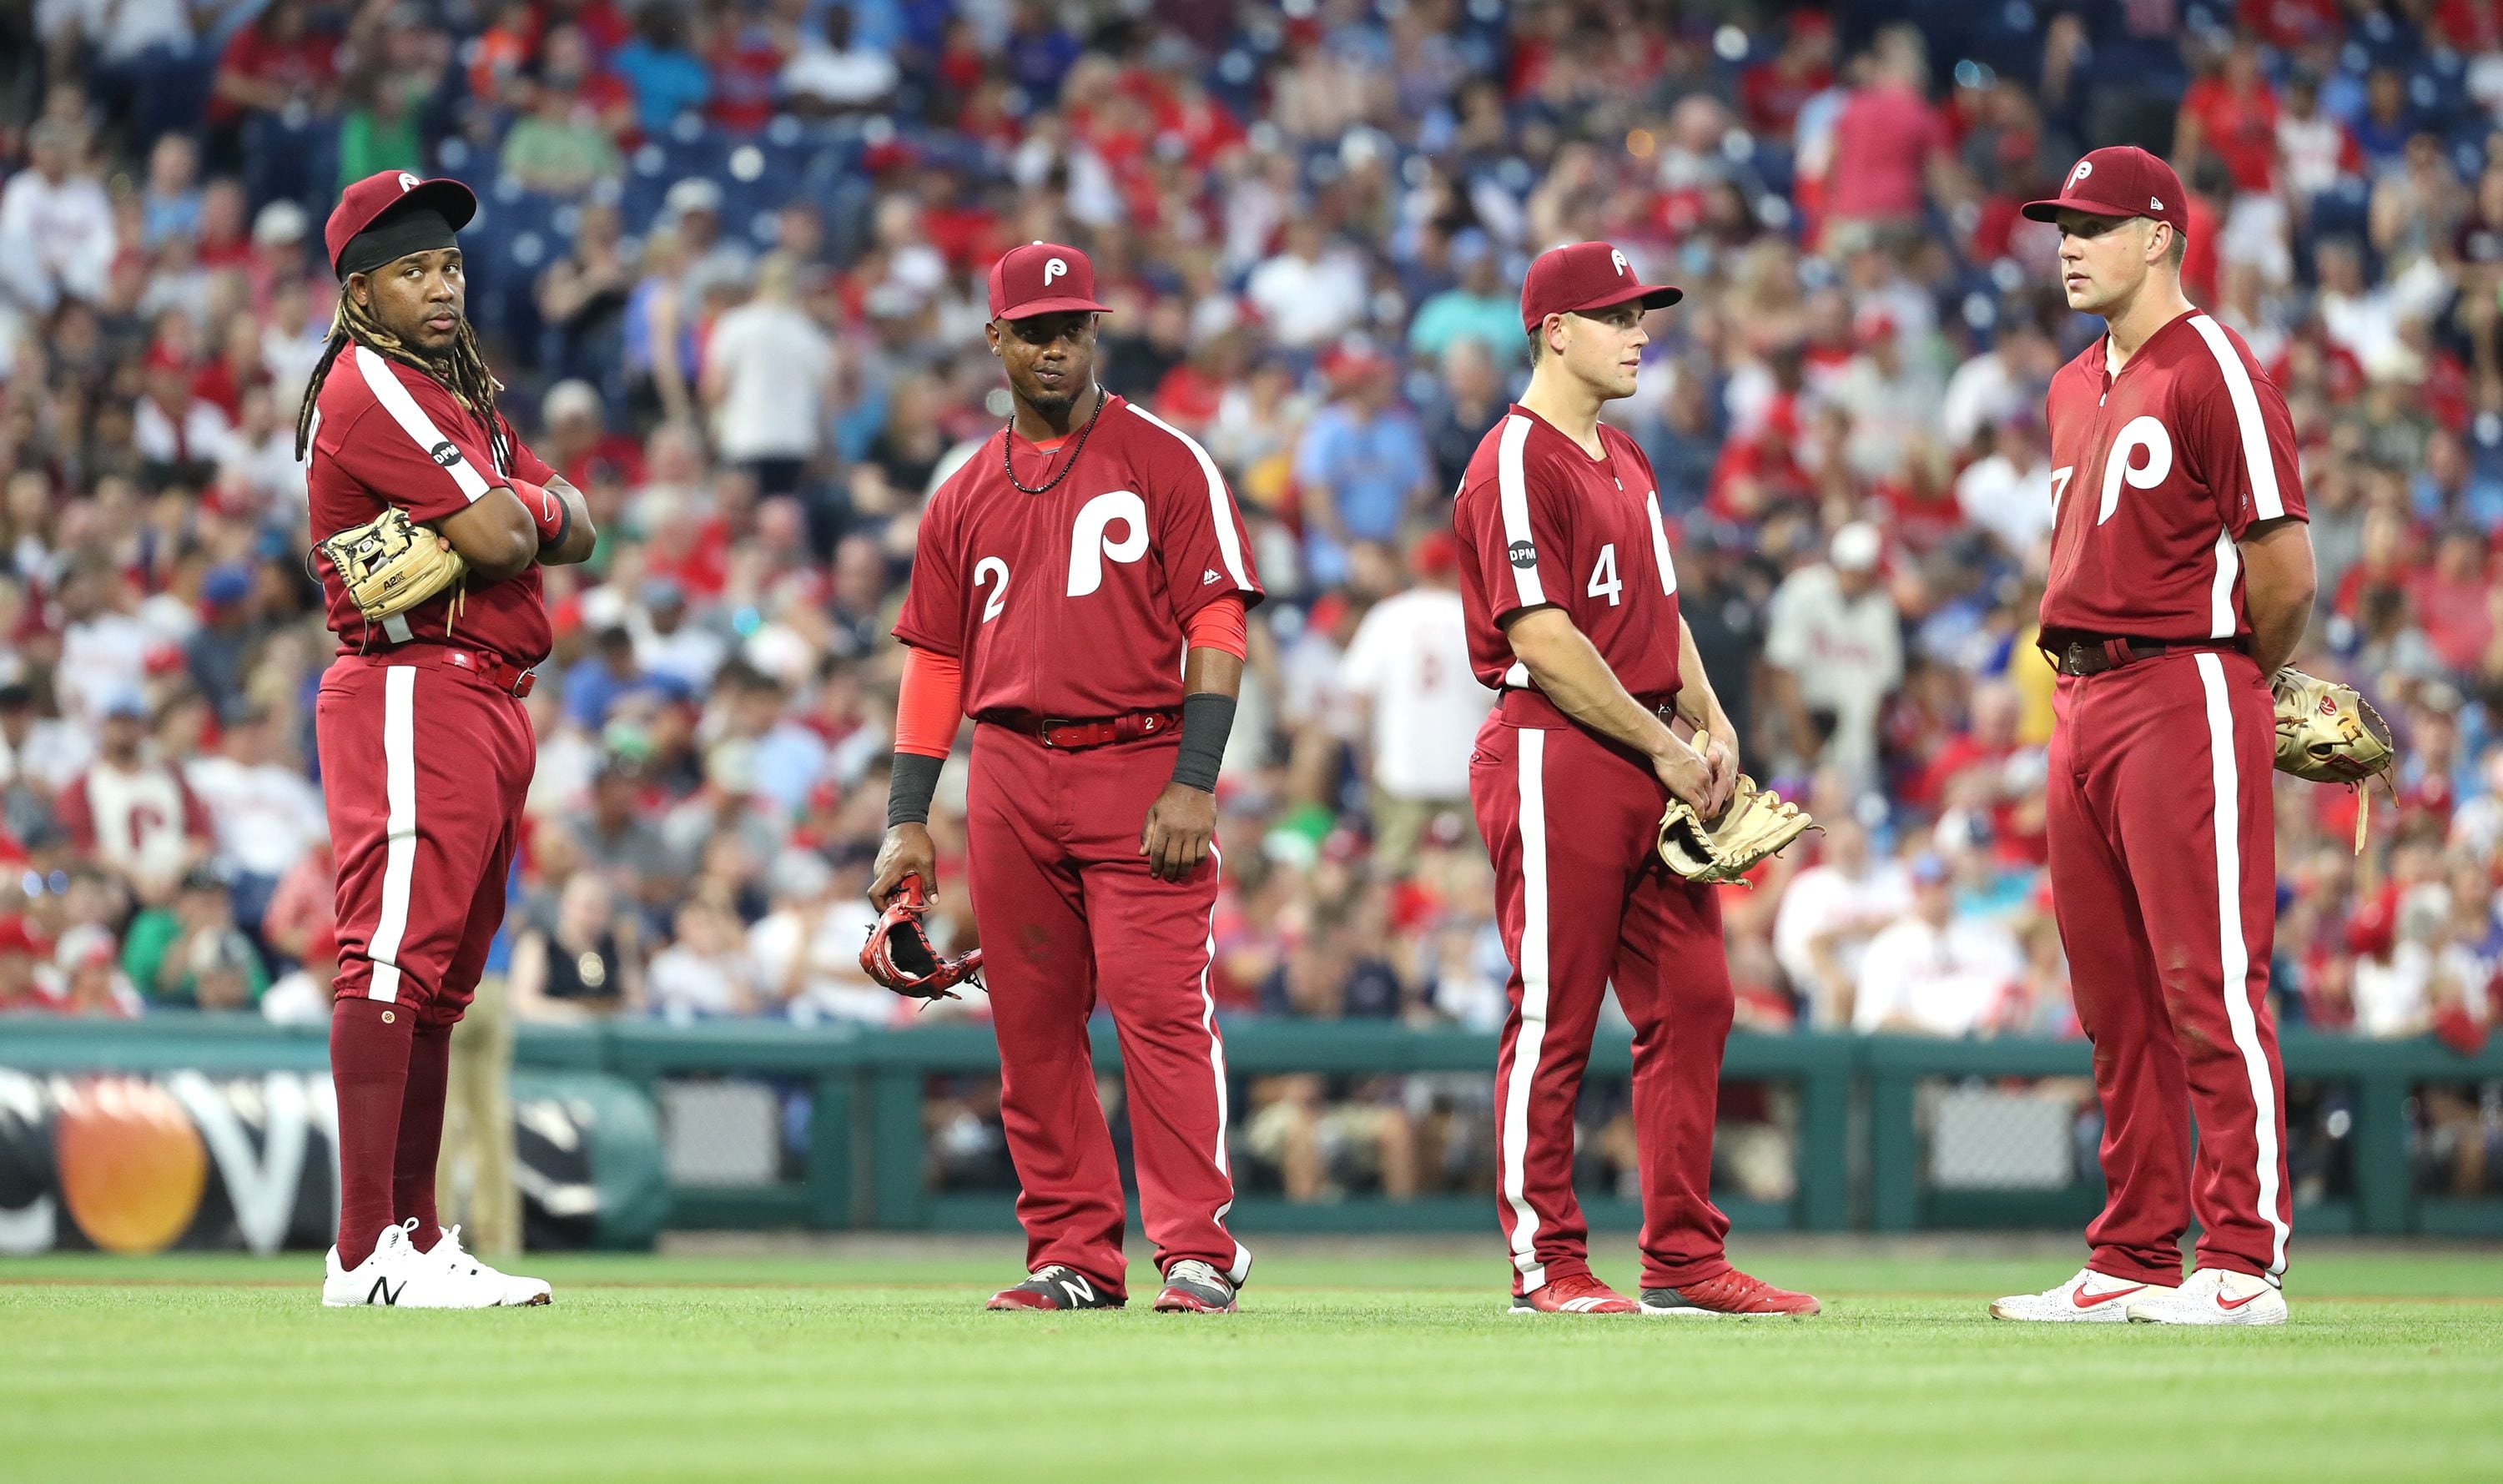 Phillies to bring back all-burgundy uniforms for 1970s retro night on  Saturday